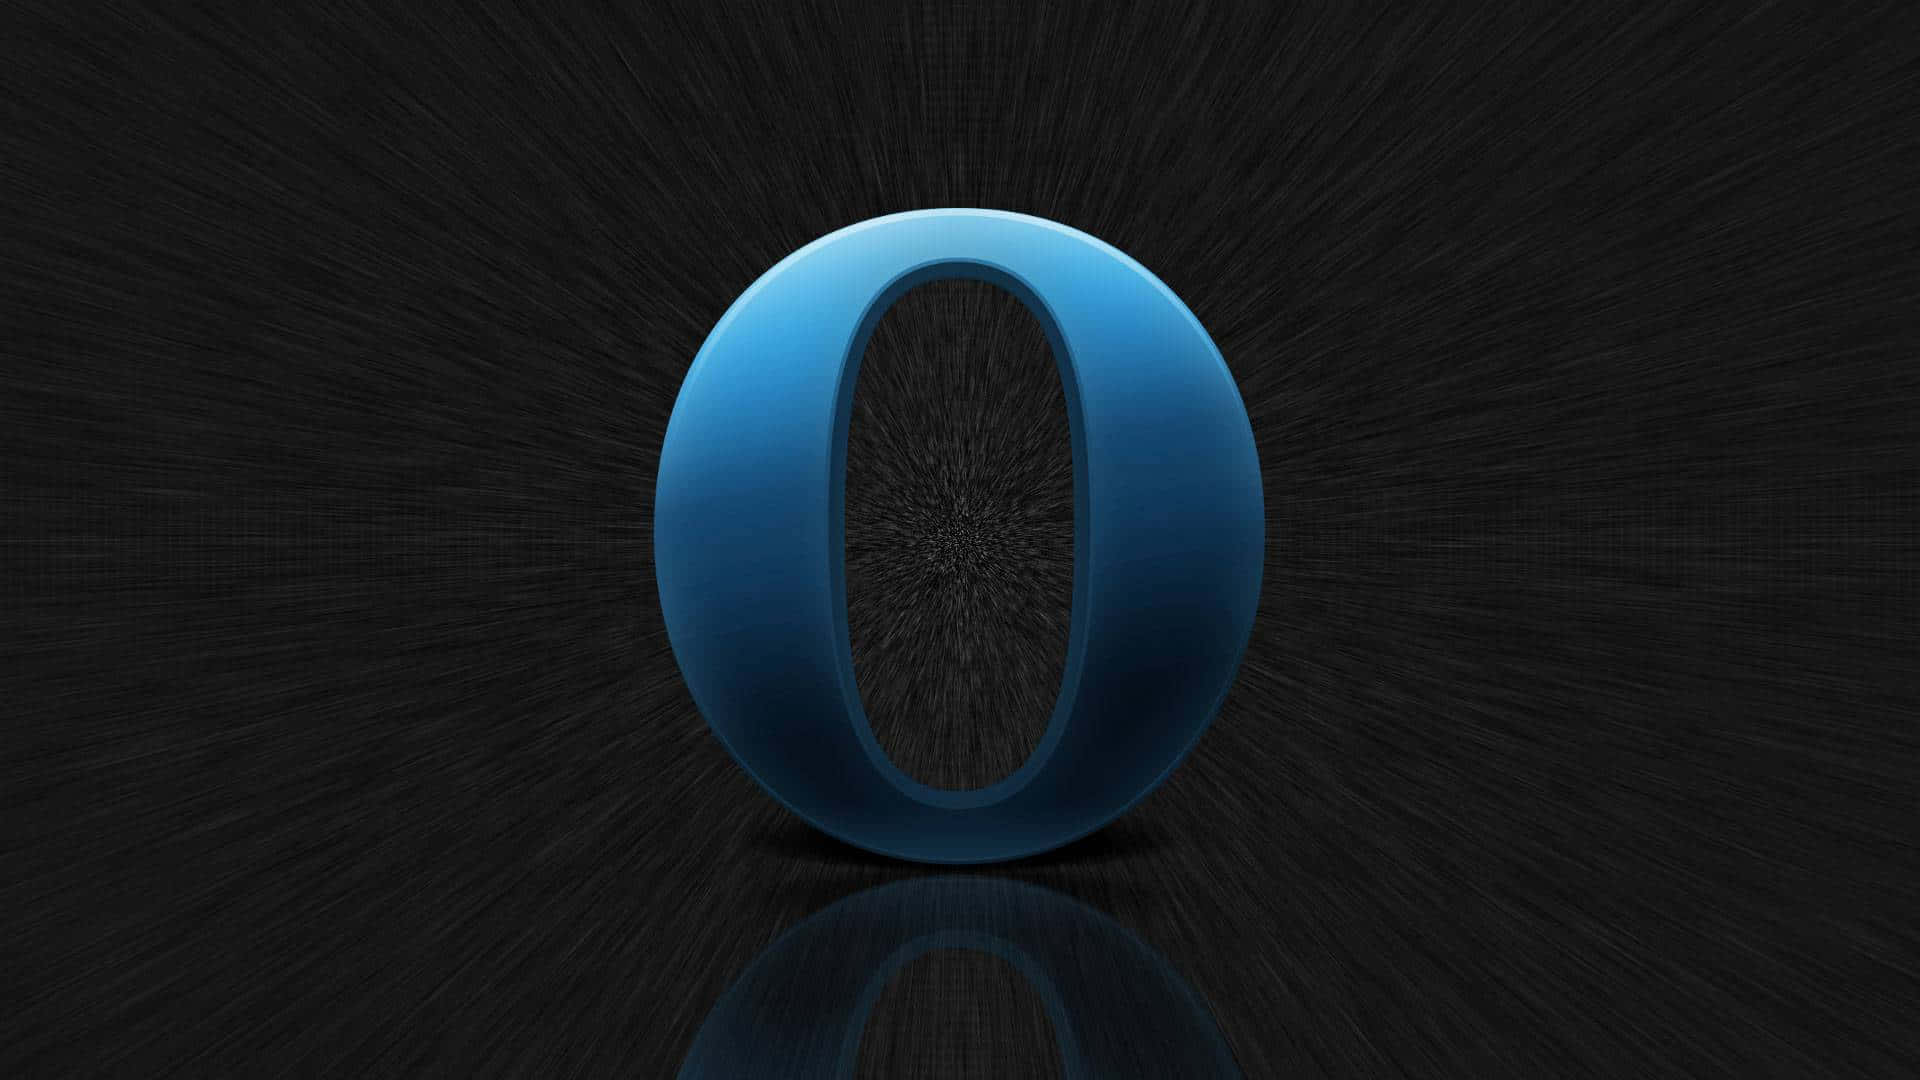 A Blue Ring With A Reflection On A Black Background Wallpaper